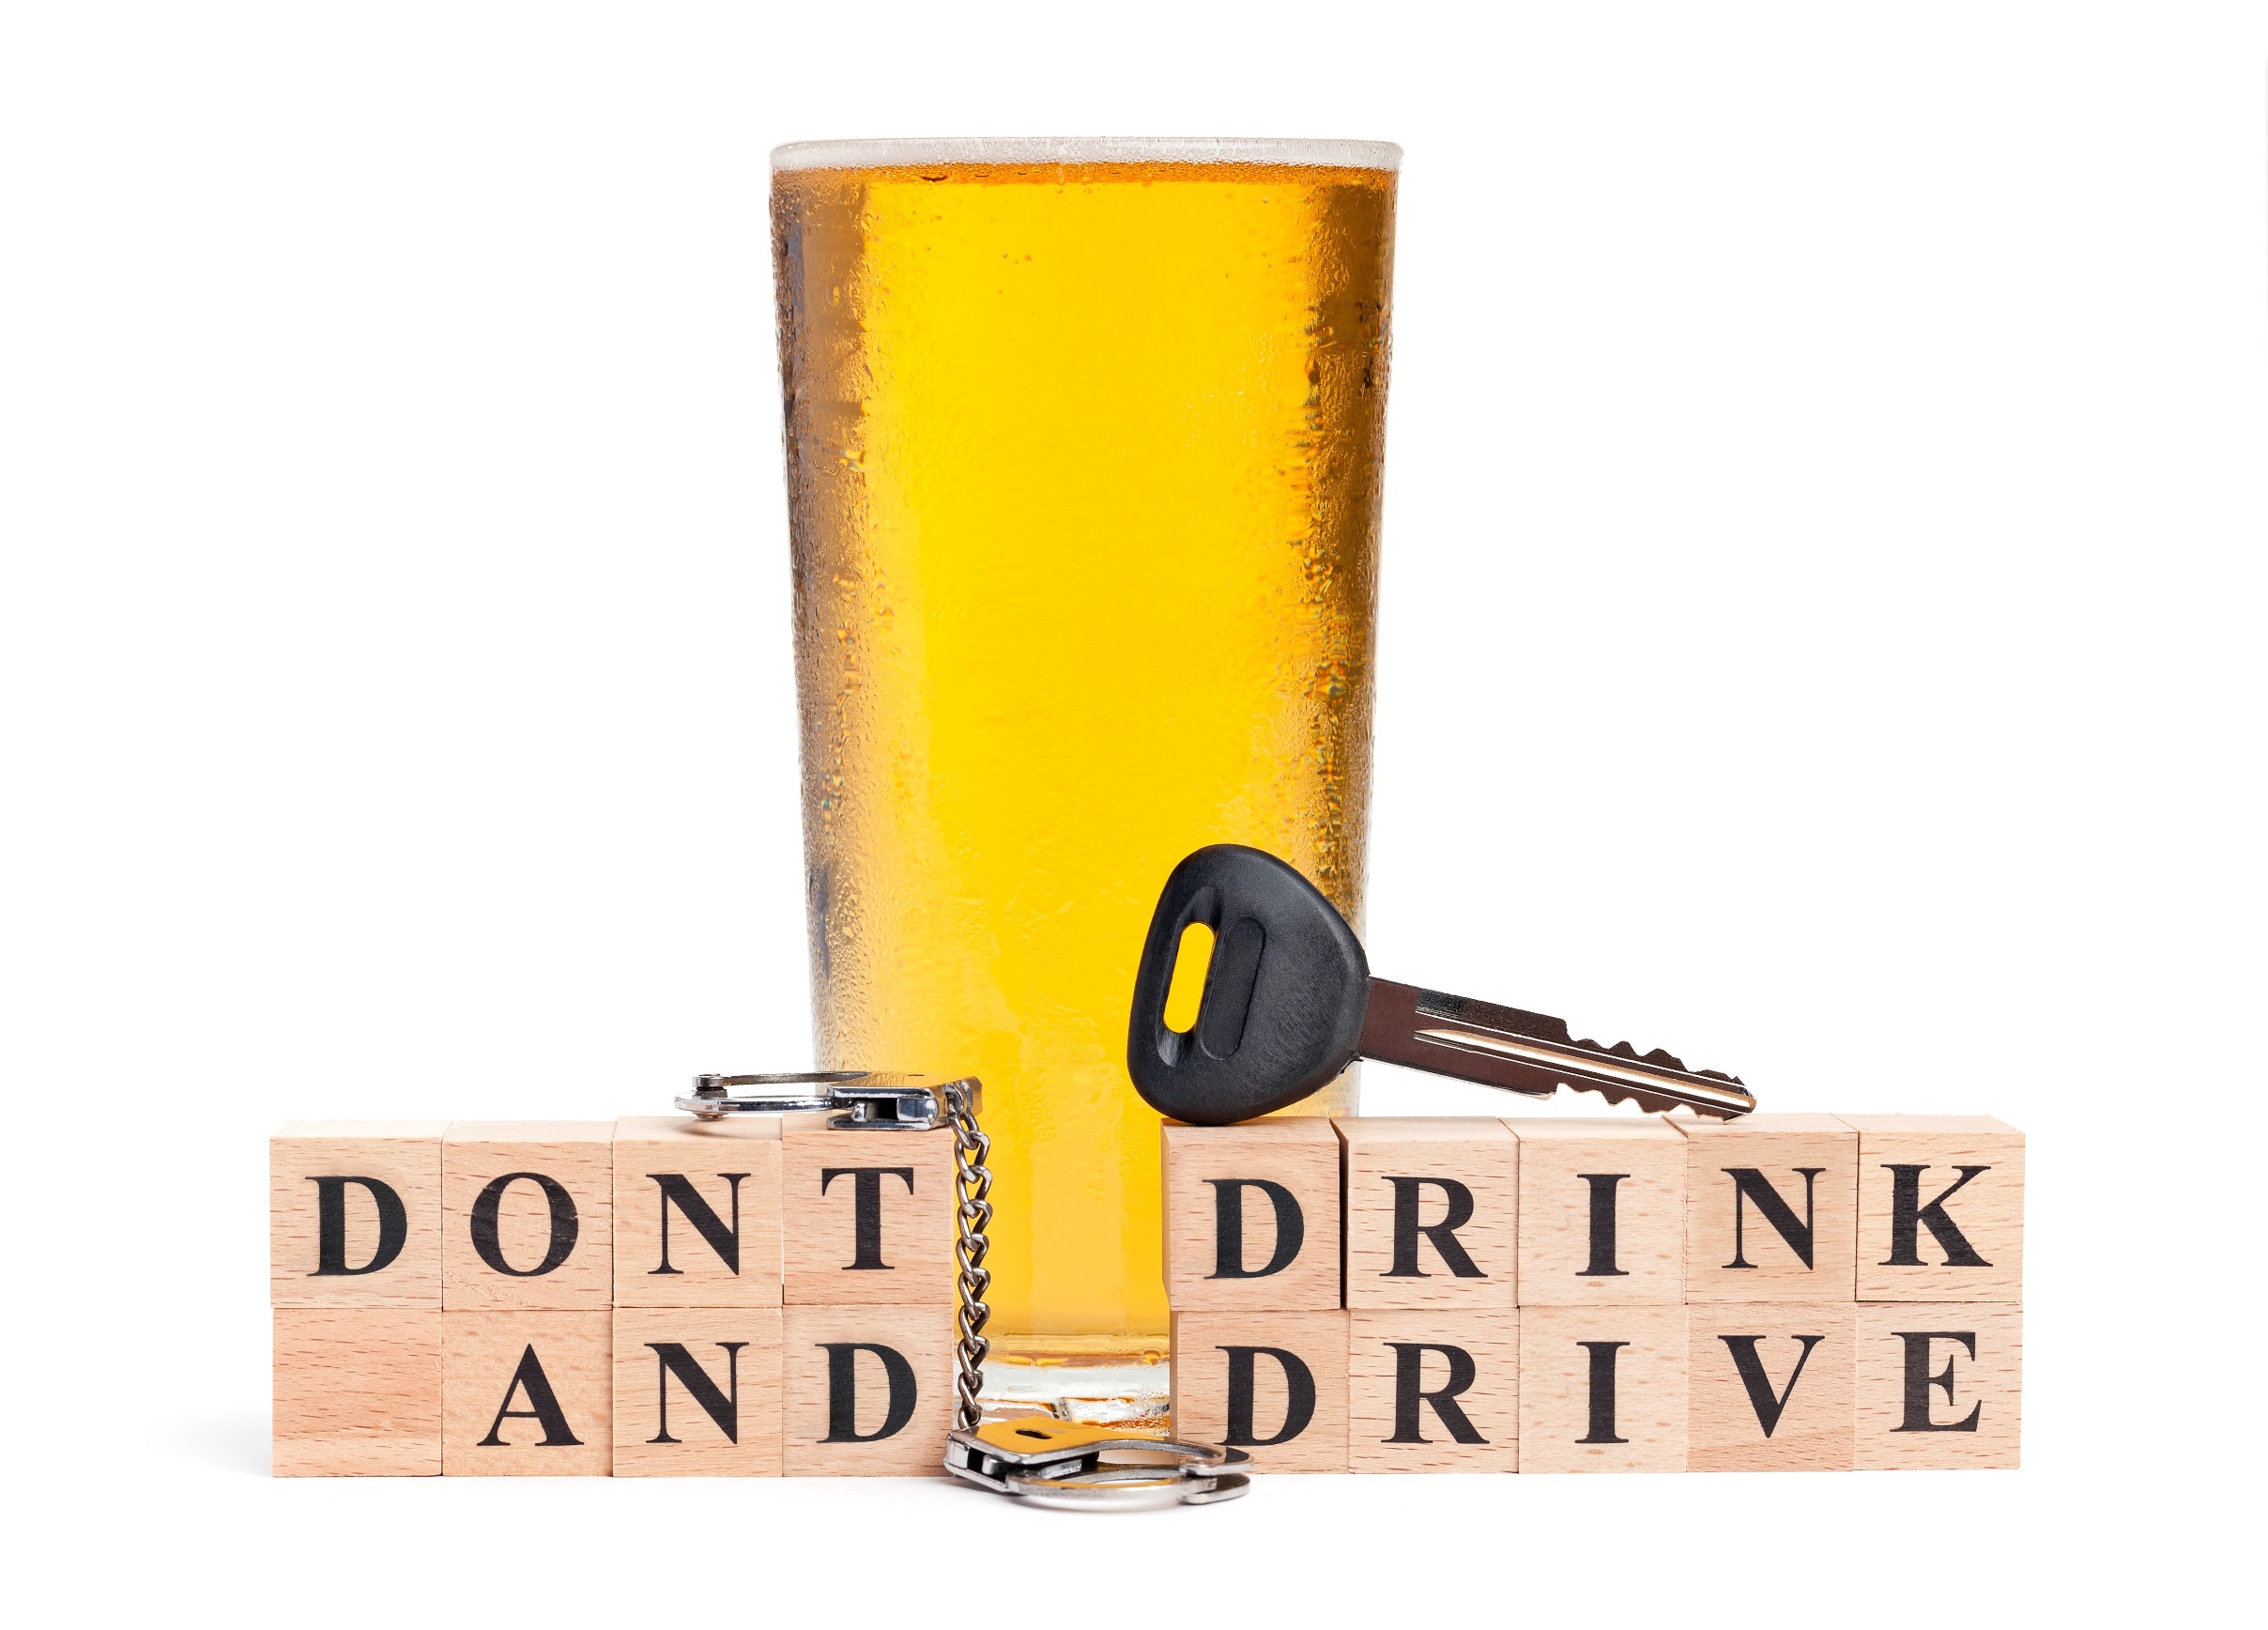 New study from JAMA on impaired driving technology